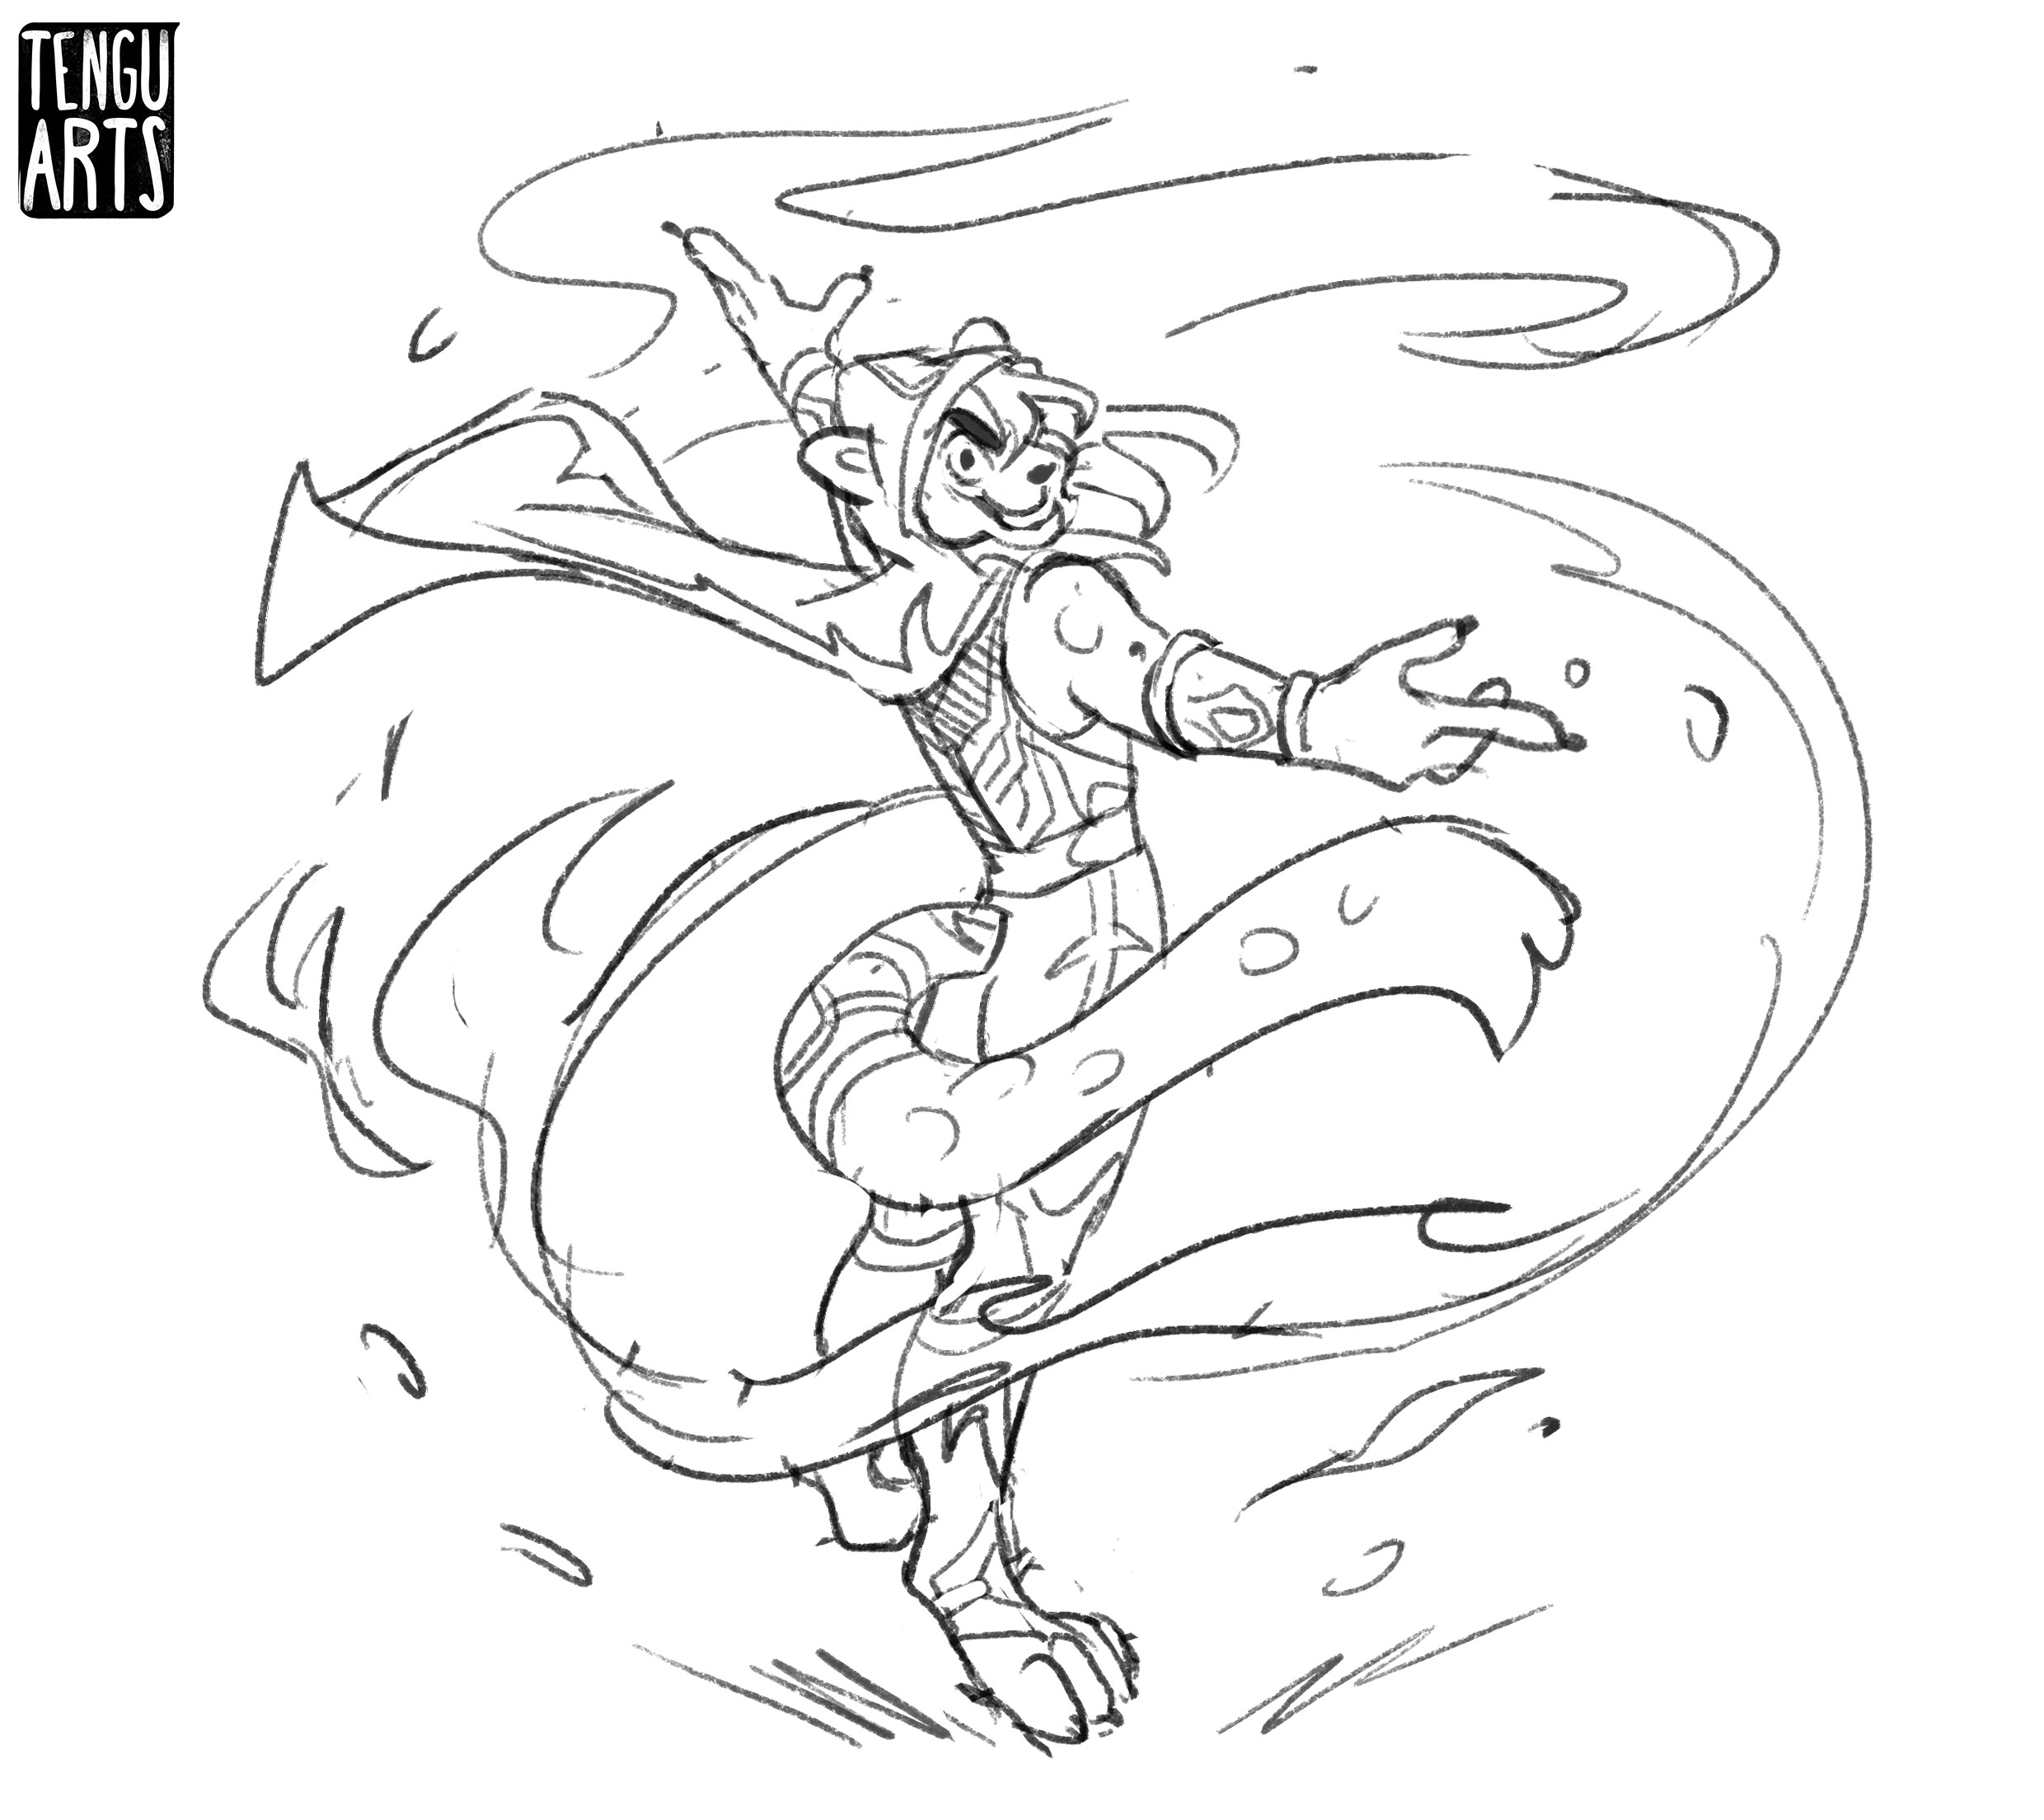 Sketch: I tried my best to do a dynamic pose with this one. 